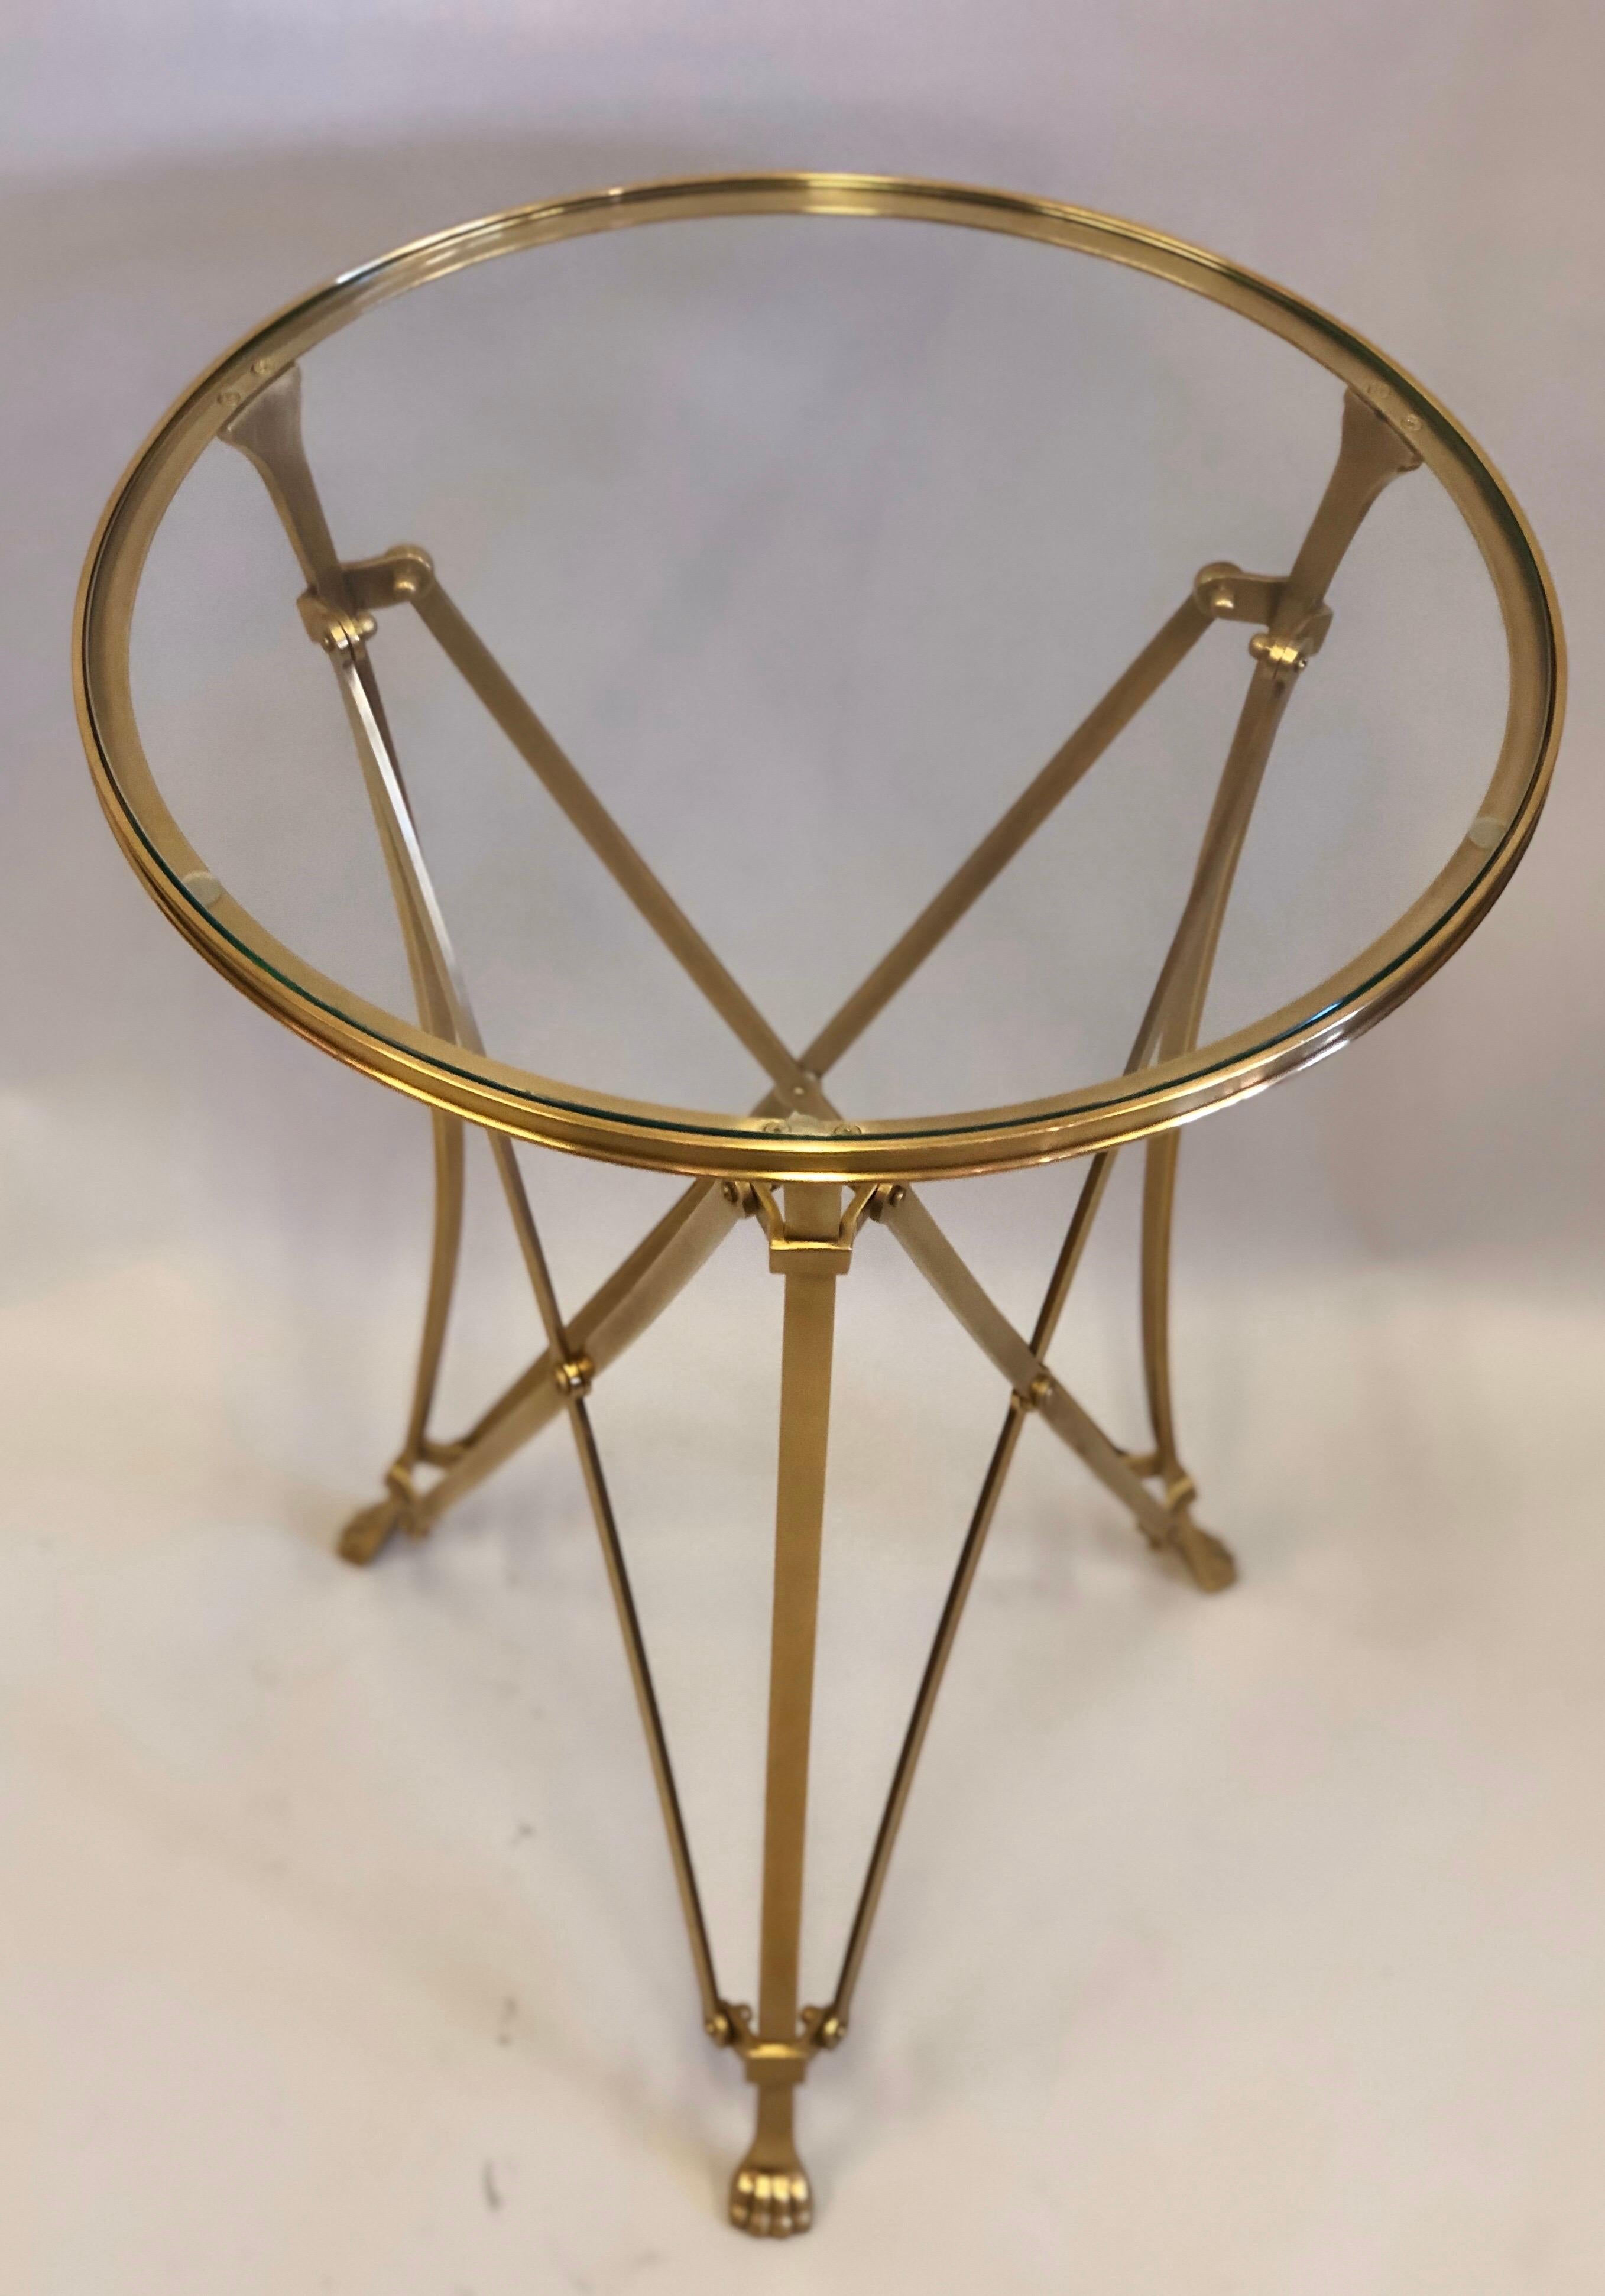 Elegant pair of French modern neoclassical inspired side tables or gueridons in solid brass with refined detailing present in legs, feet, cross-bracing and hardware. The top is tempered glass and has a slight bevel. Highest quality of design,